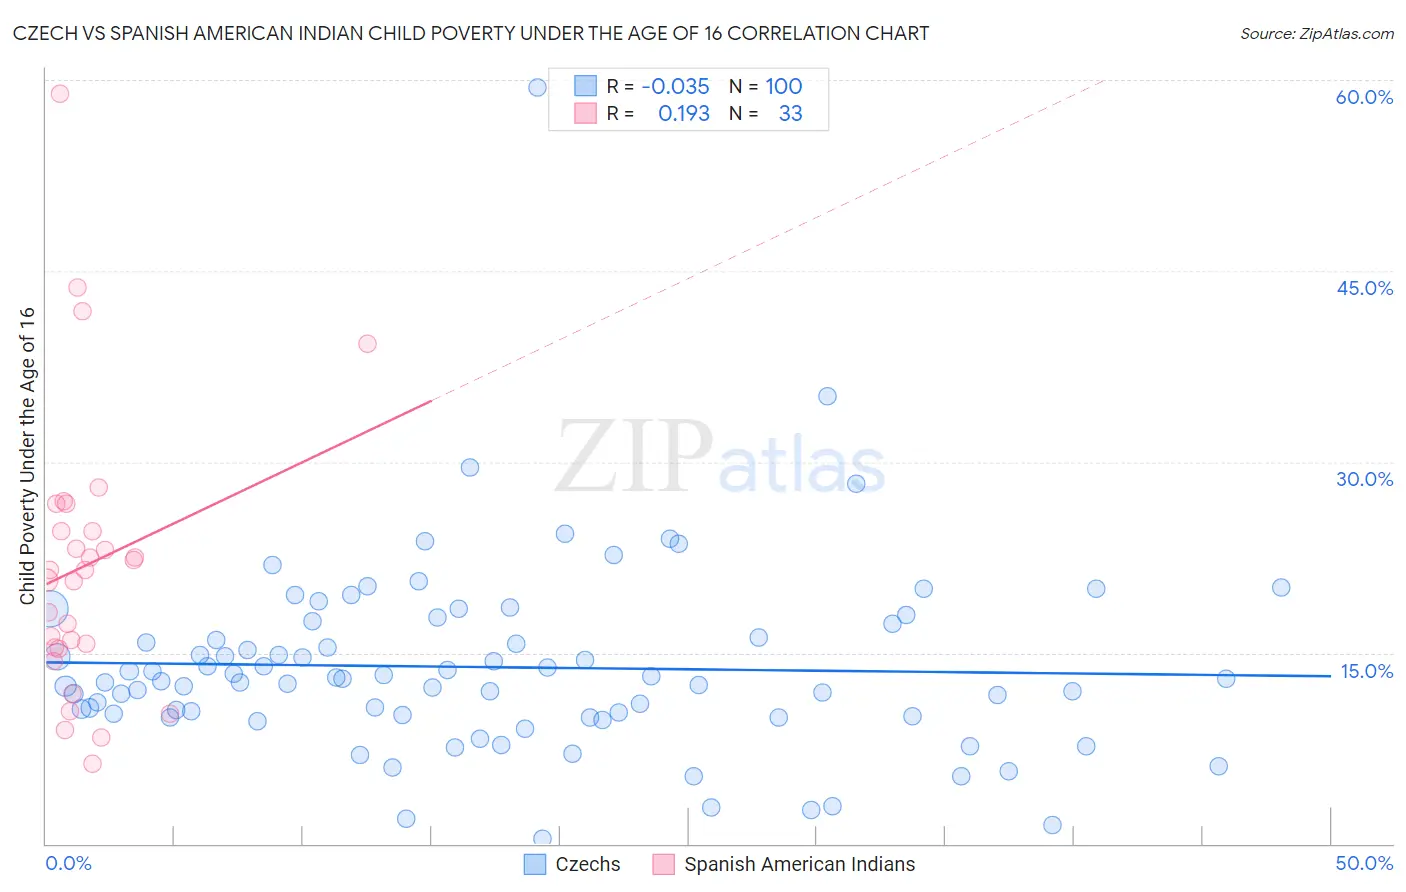 Czech vs Spanish American Indian Child Poverty Under the Age of 16